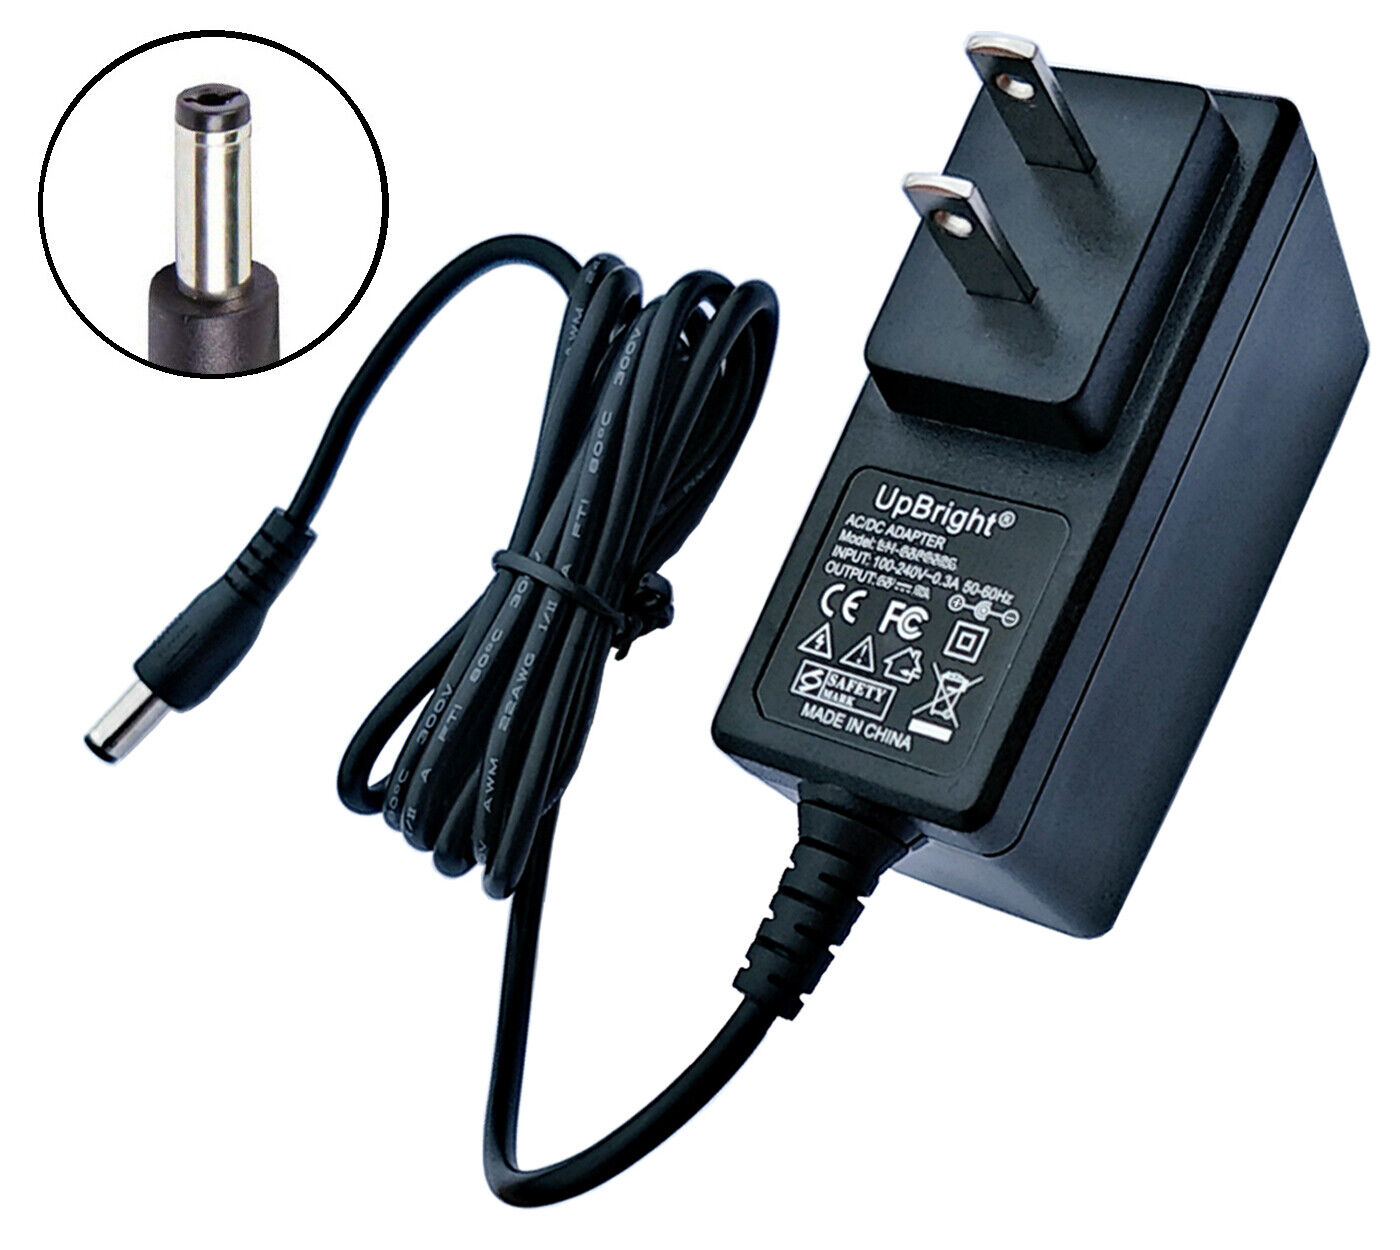 AC Adapter For Toshiba Strata CIX IPT2020-SD IPT 2020 SD VoIP Phone Power Supply